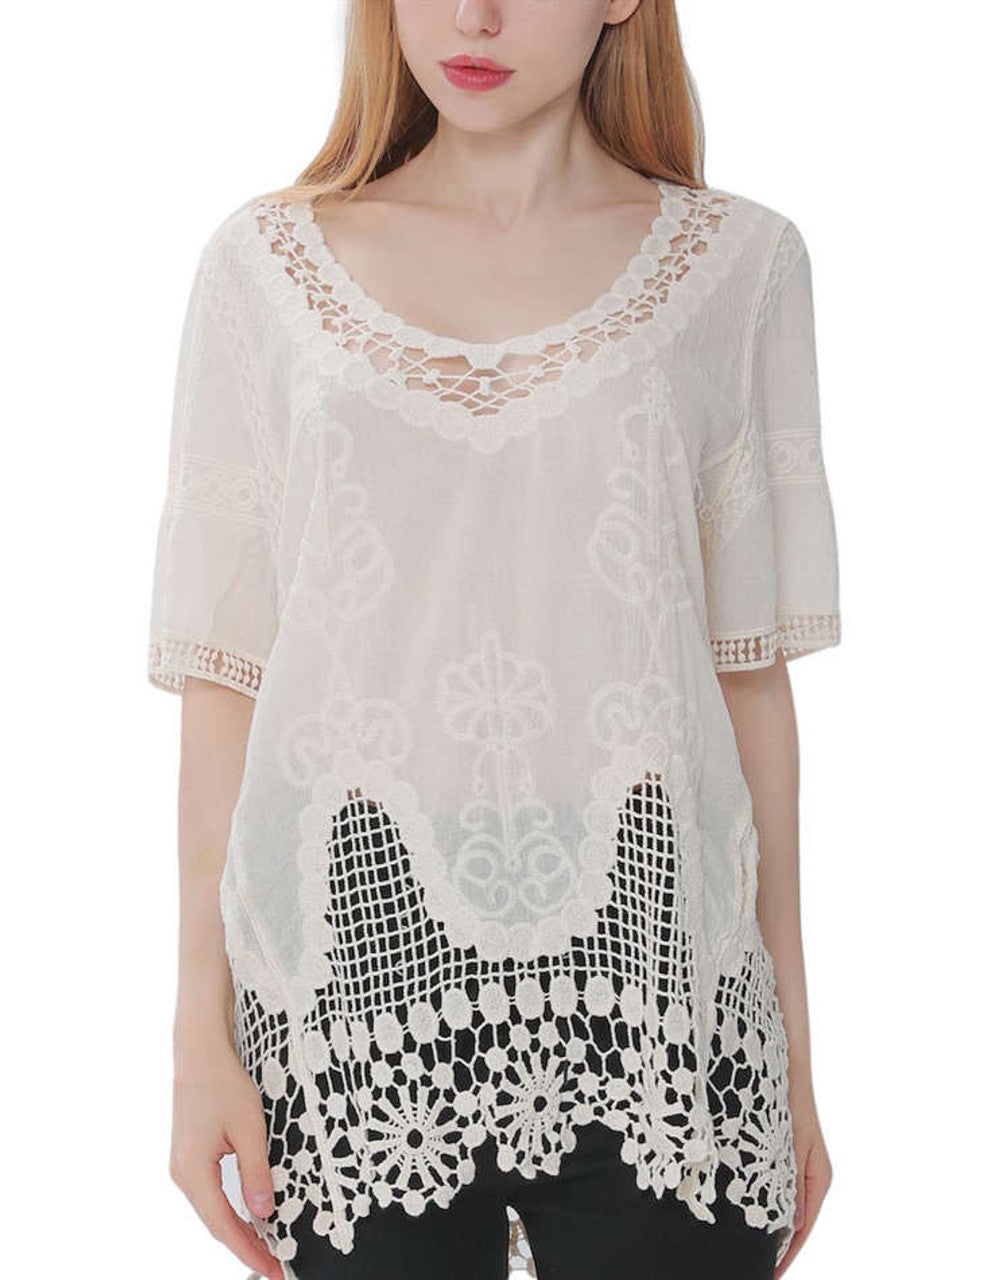 WOMEN'S EMBROIDERED TOP